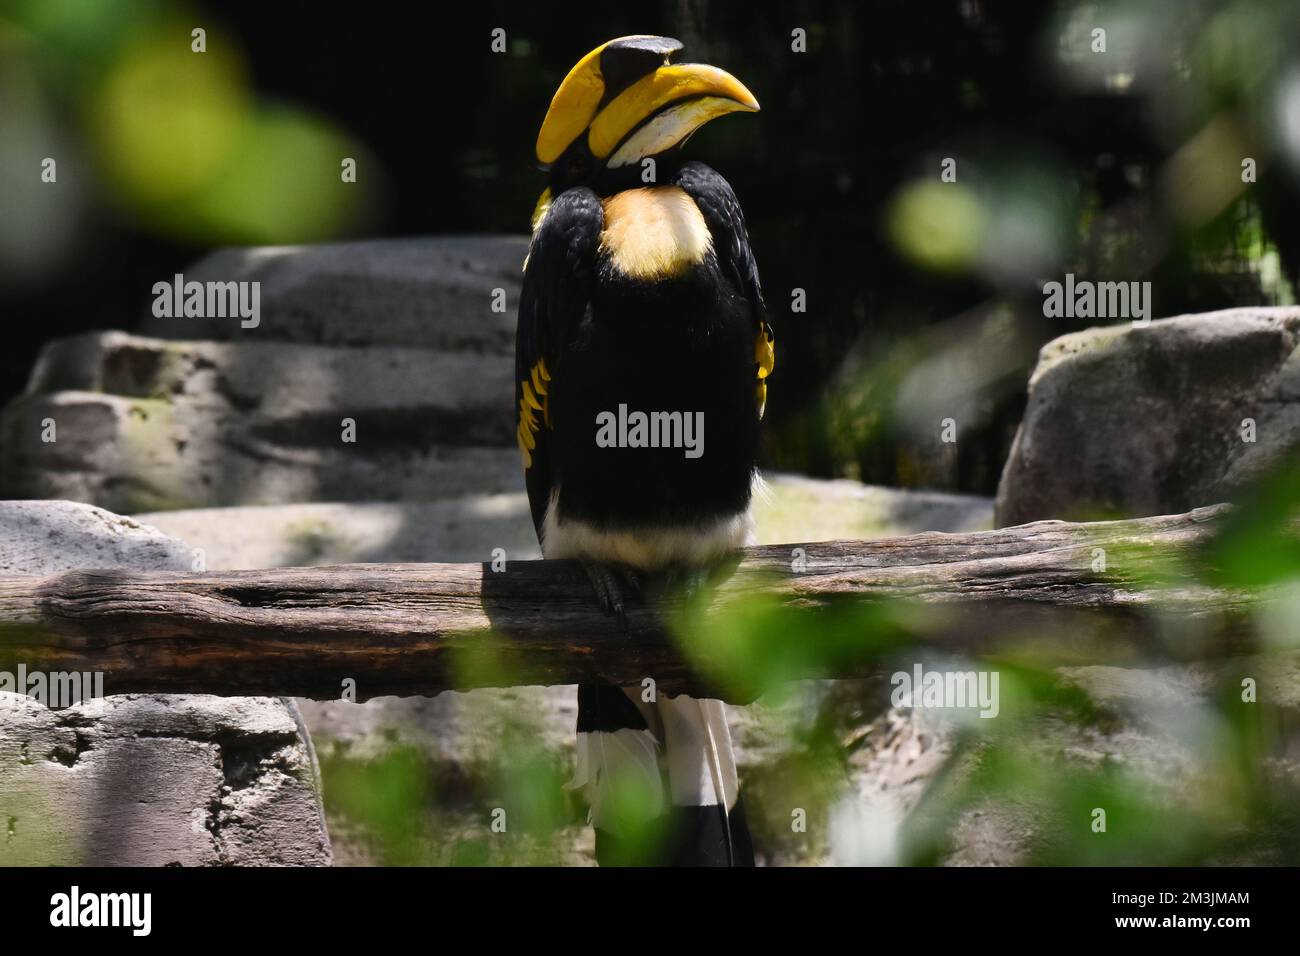 A Great Hornbill species  seen in its habitat during a species conservation program, the zoo has 1803 animals in captivity at Chapultepec Zoo. Stock Photo